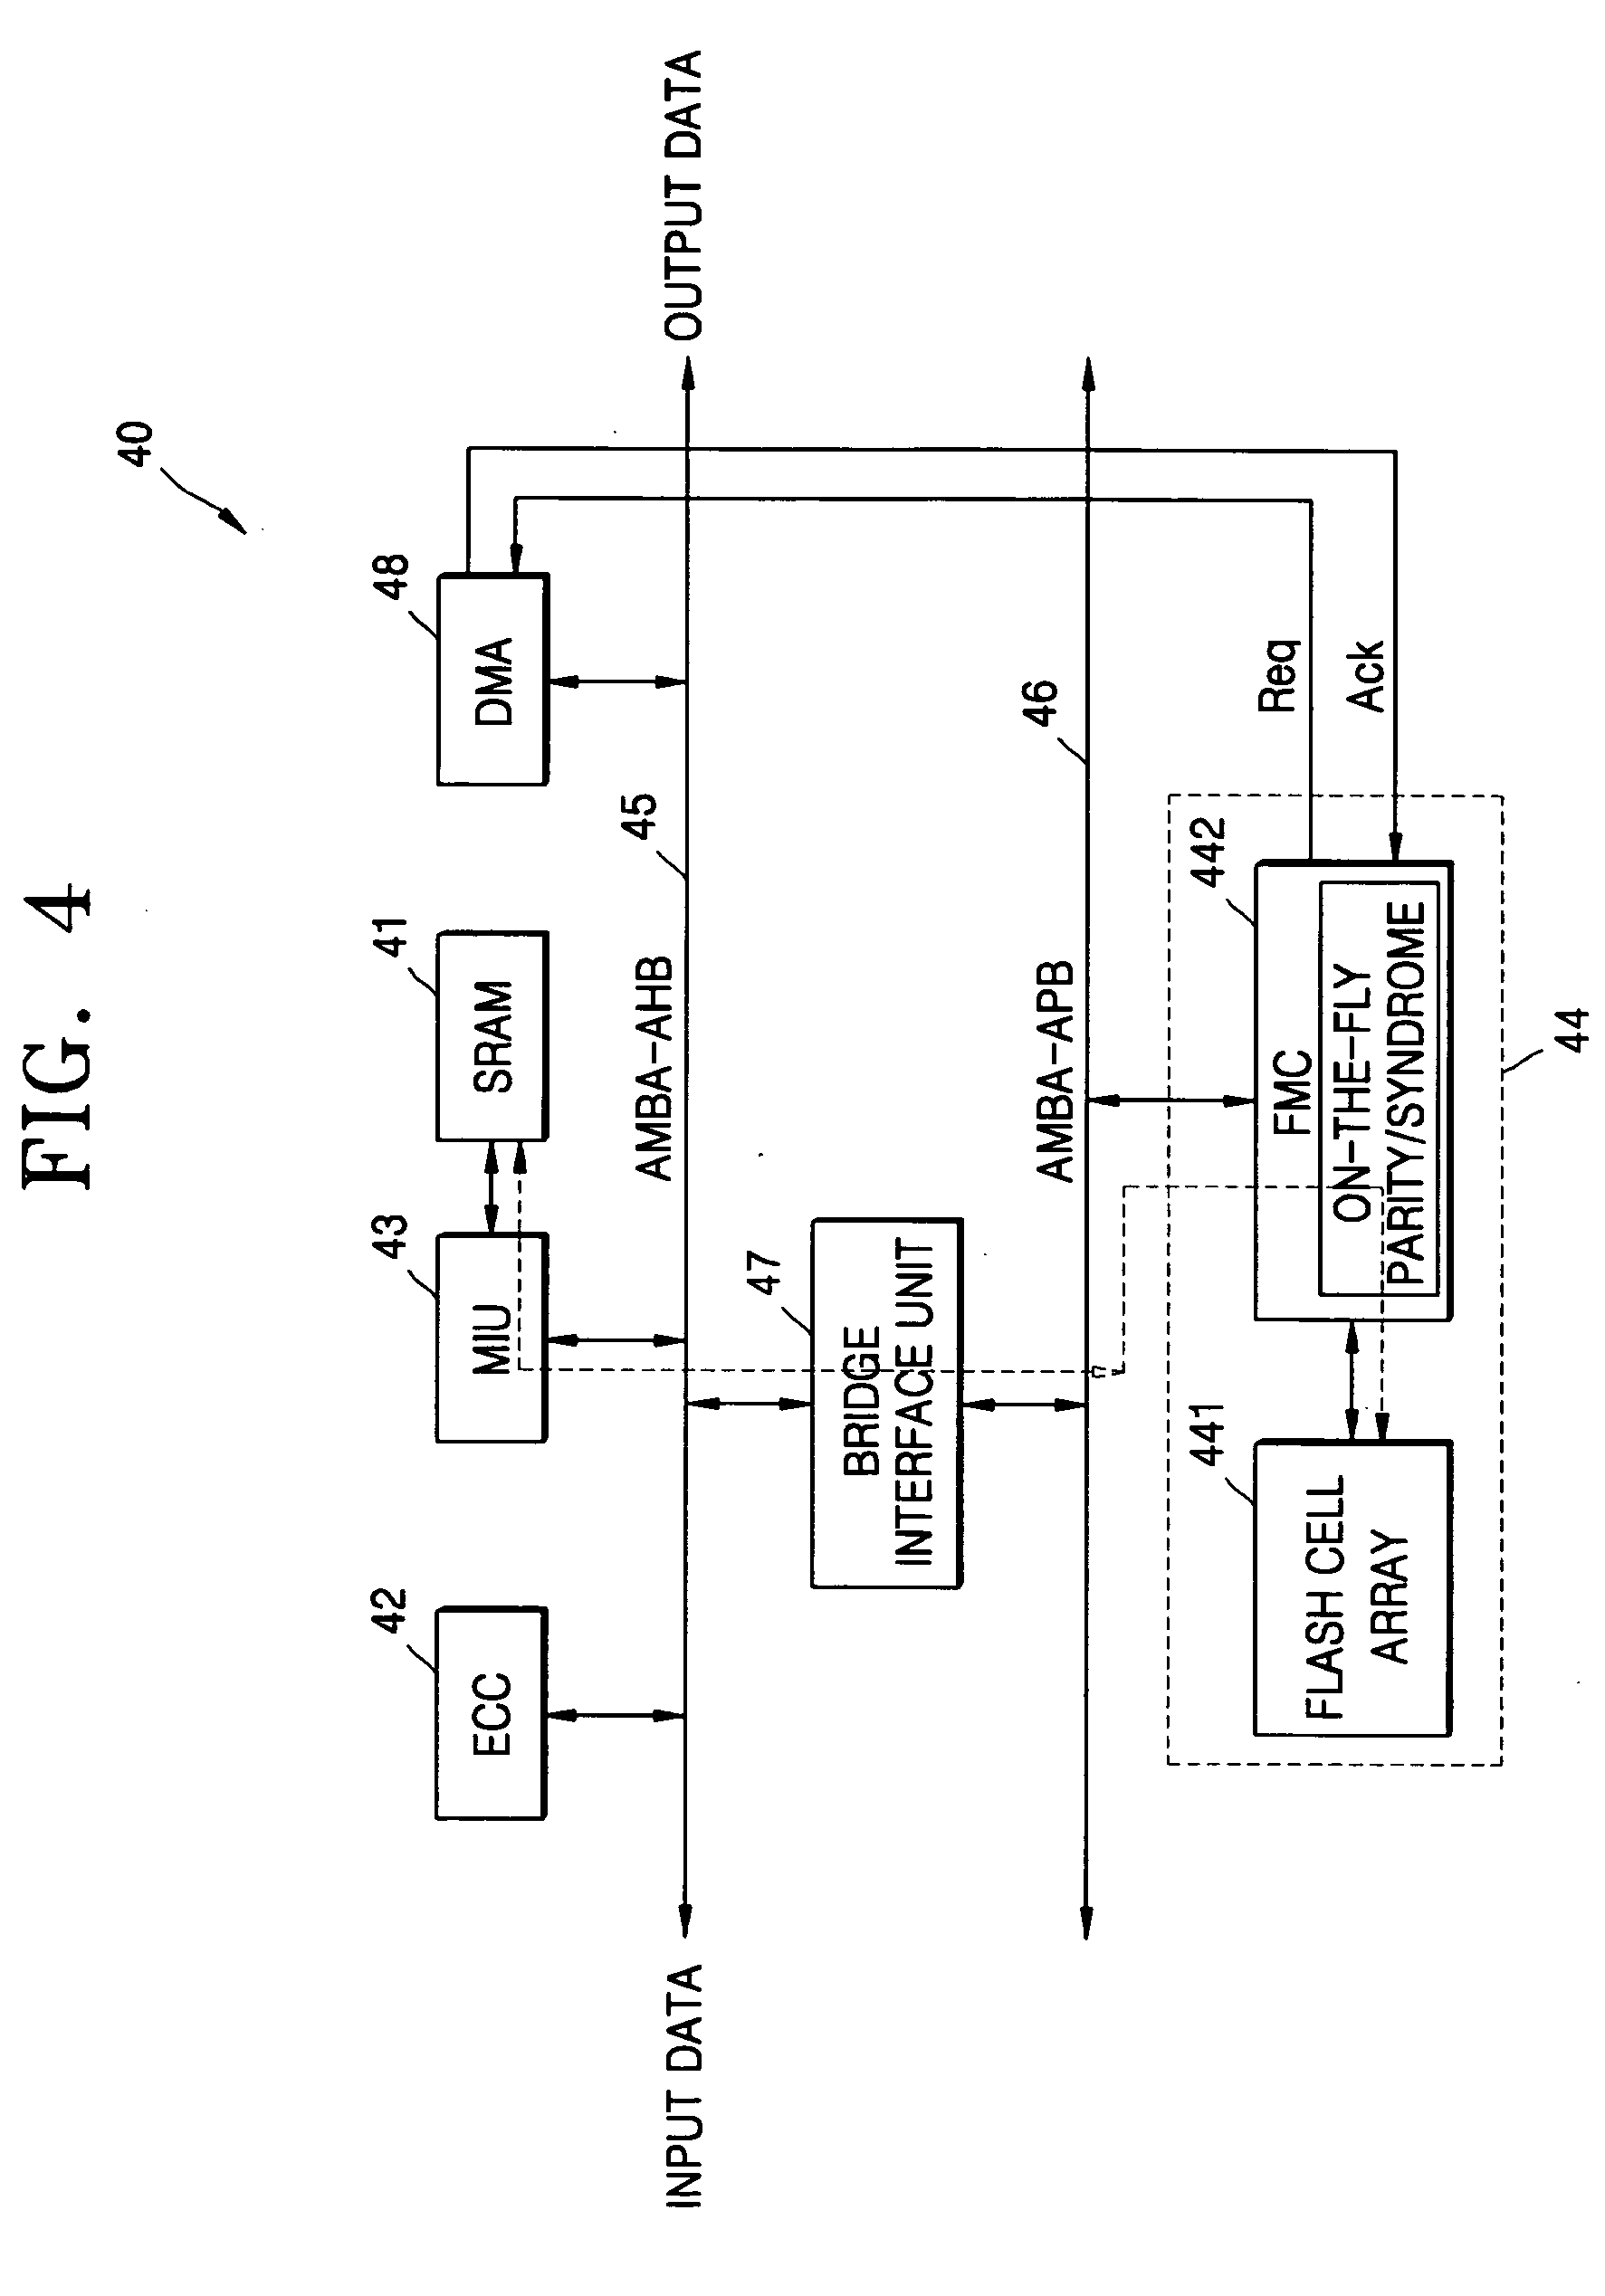 On-the fly error checking and correction codec system and method for supporting non-volatile memory